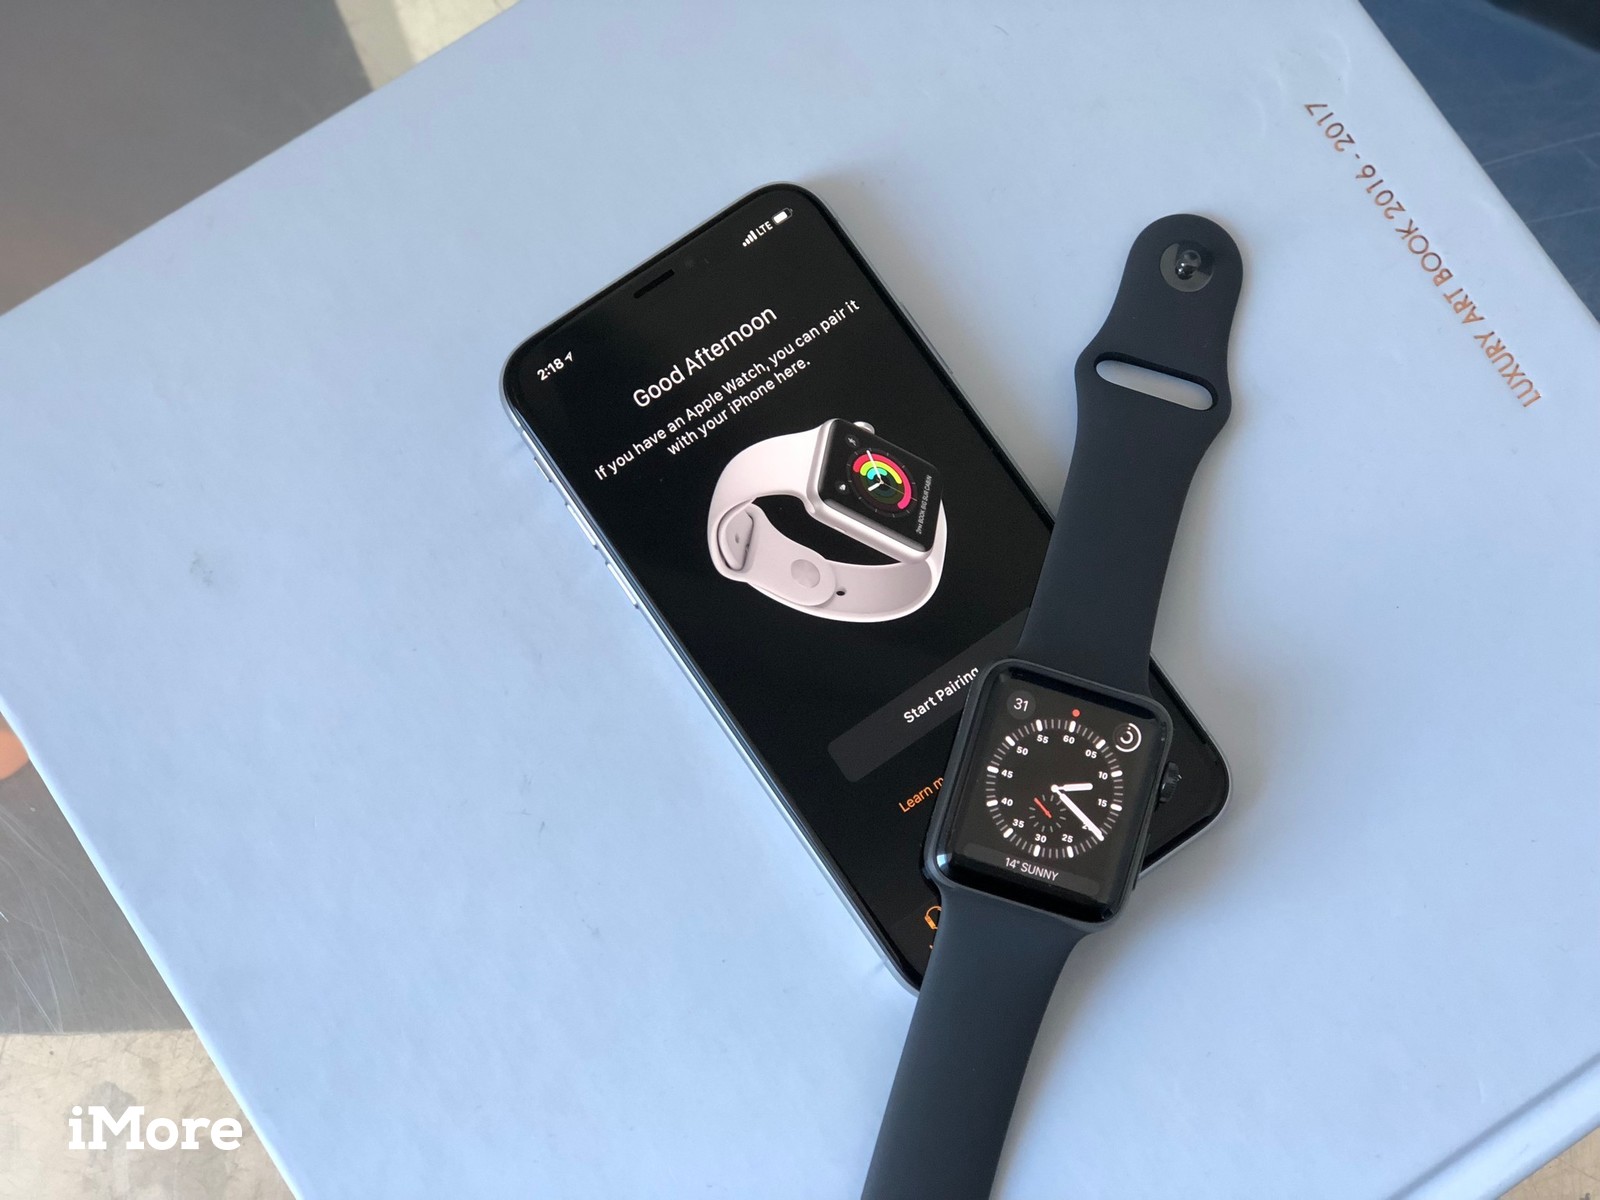 How To Manage Your Icloud Account On Apple Watch - Iphone Xr With Apple Watch - HD Wallpaper 